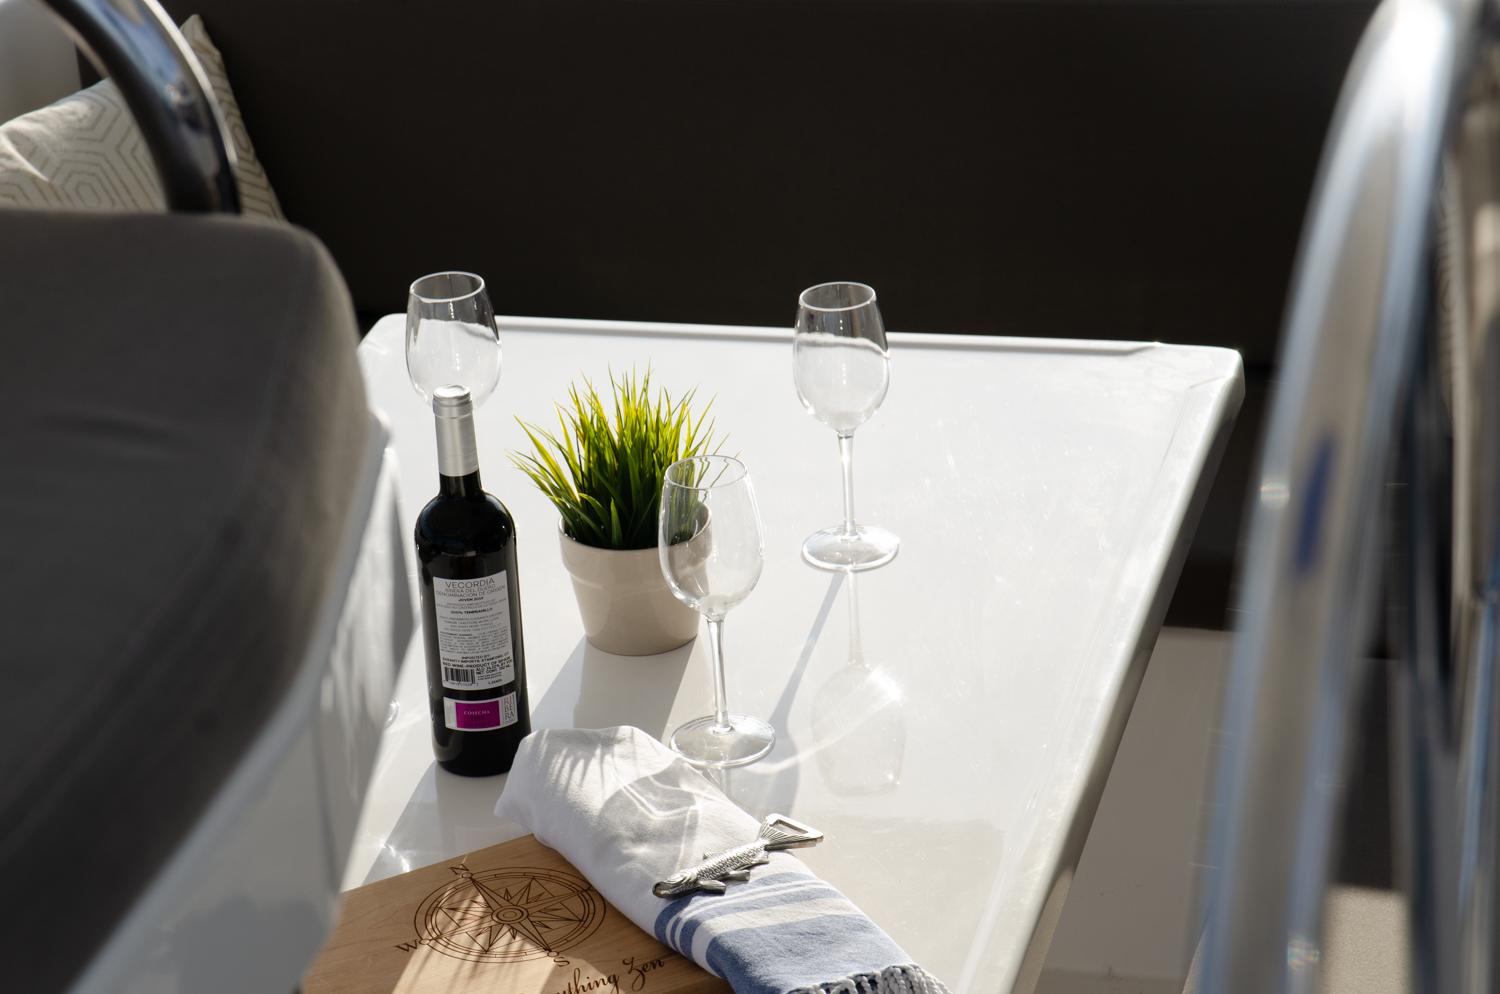 A bottle of wine and glasses on the aft table during a sailboat charter.